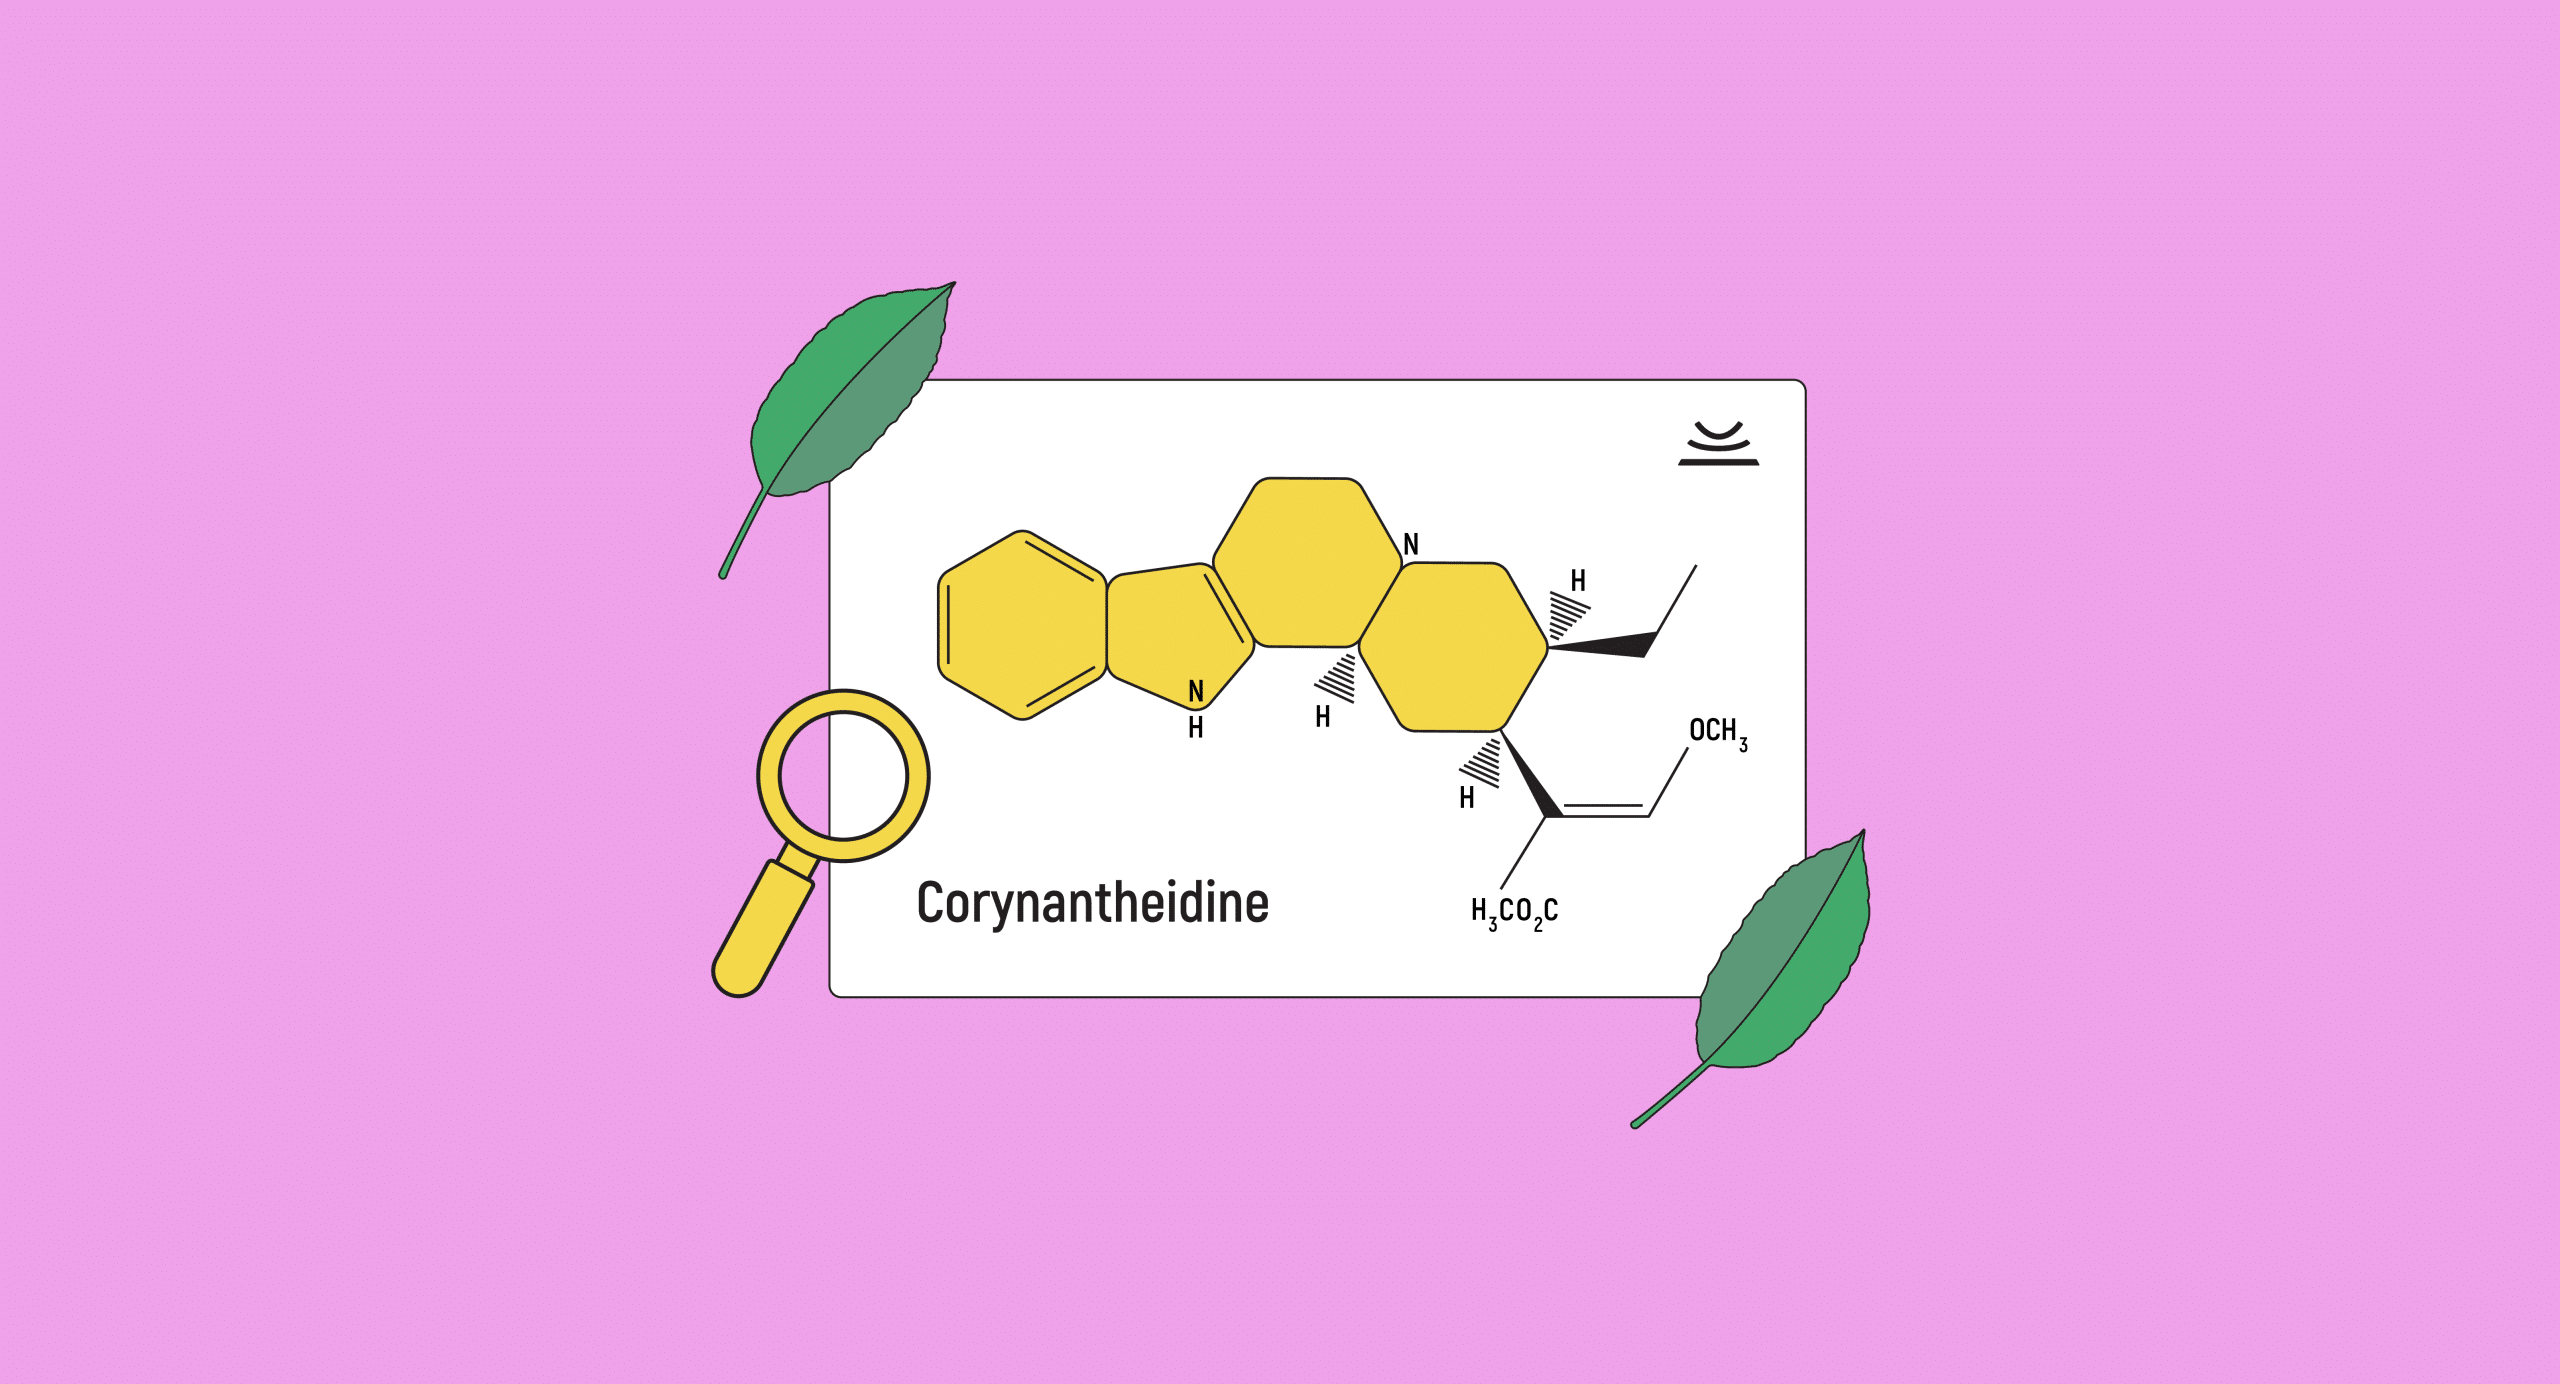 Corynantheidine: Everything You Need to Know About This Potent Alkaloid